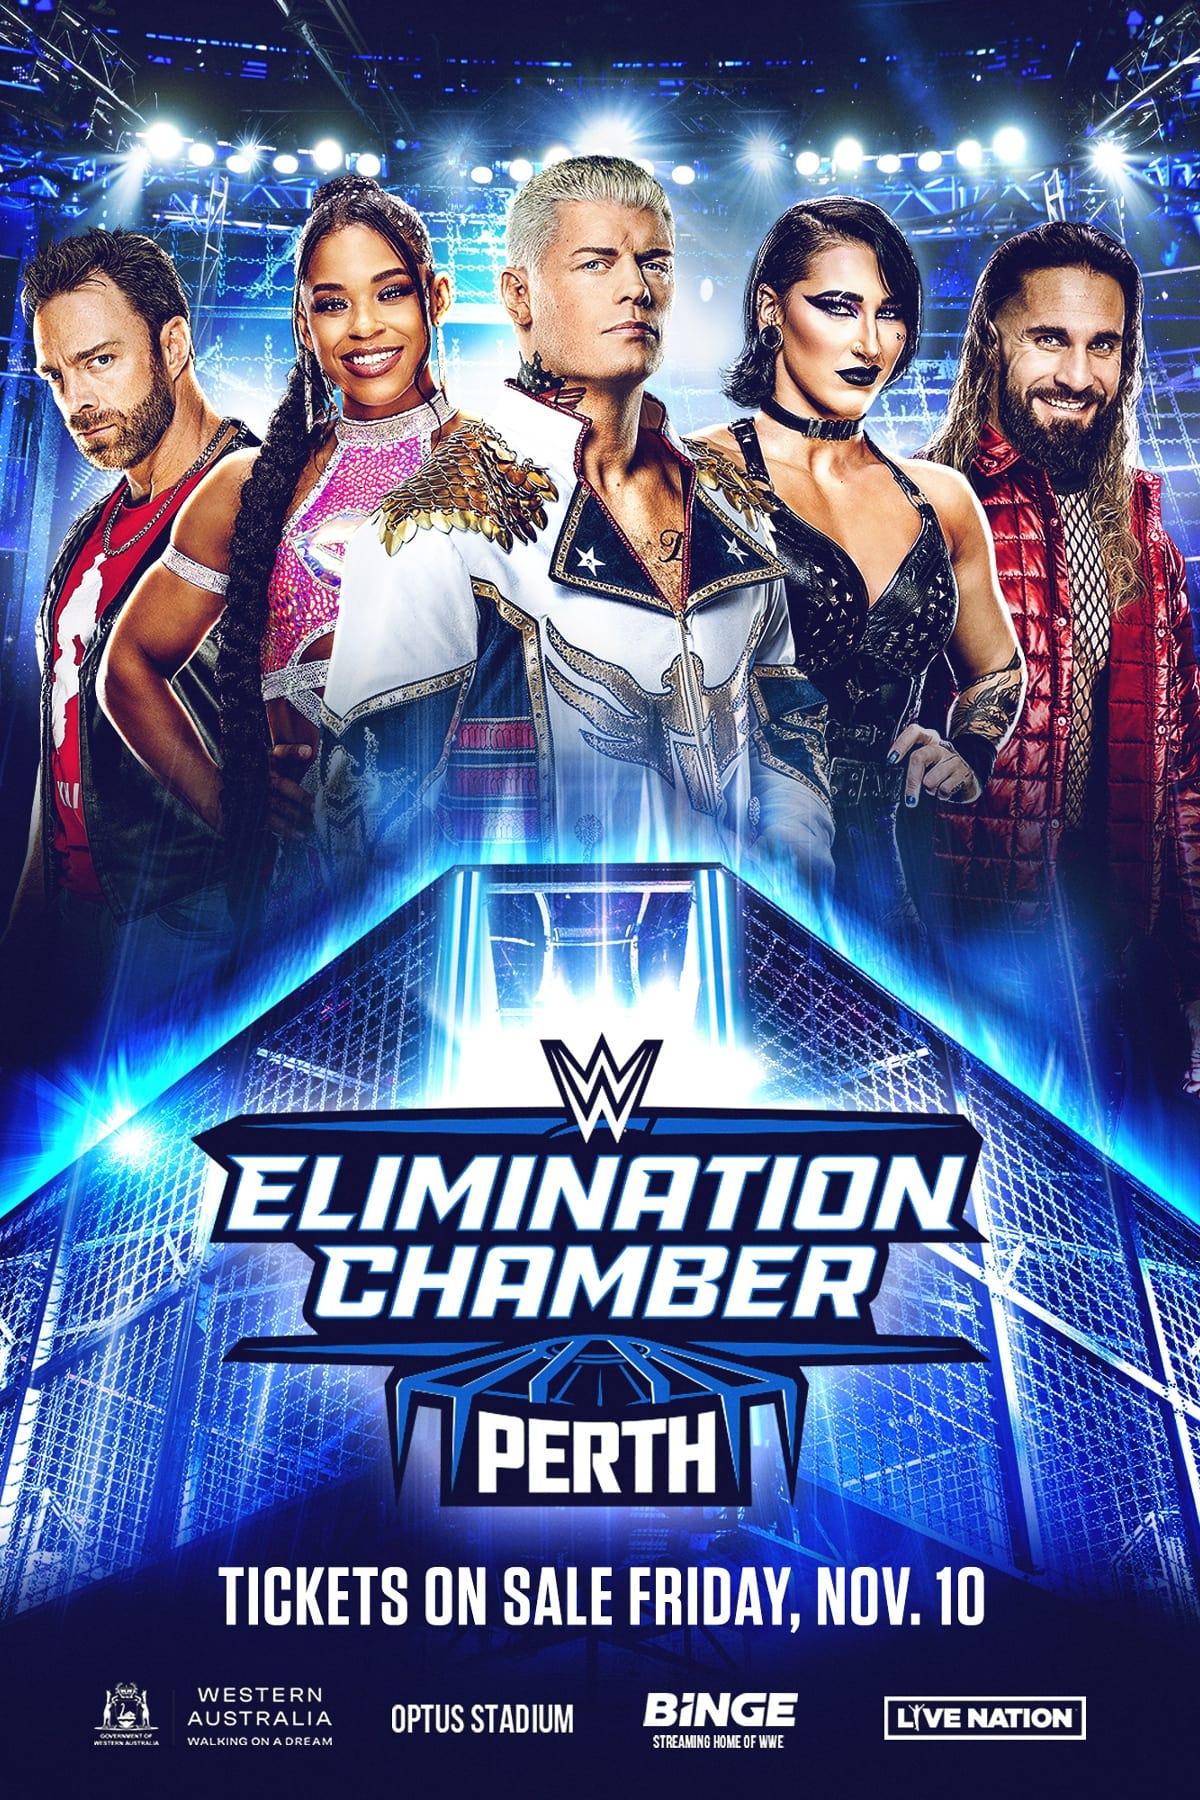 WWE Elimination Chamber: Perth poster